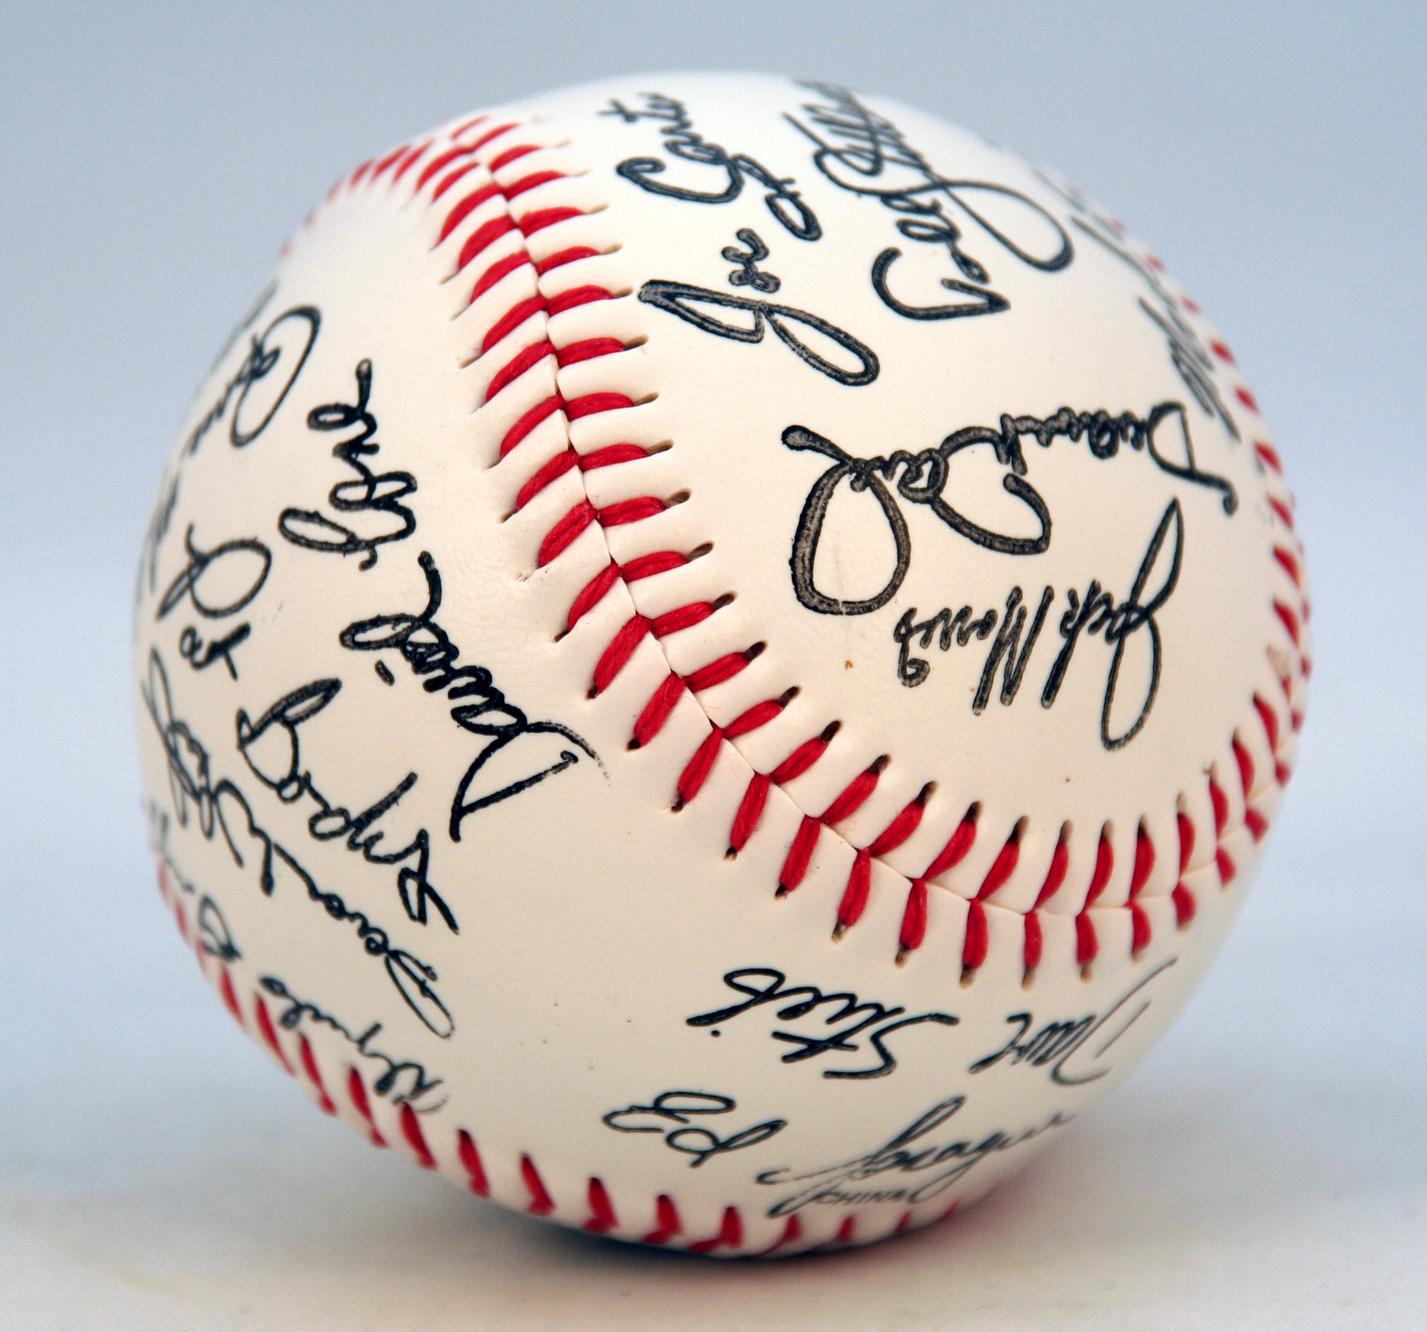 How To Properly Care For Your Autographed Ball - BallQube